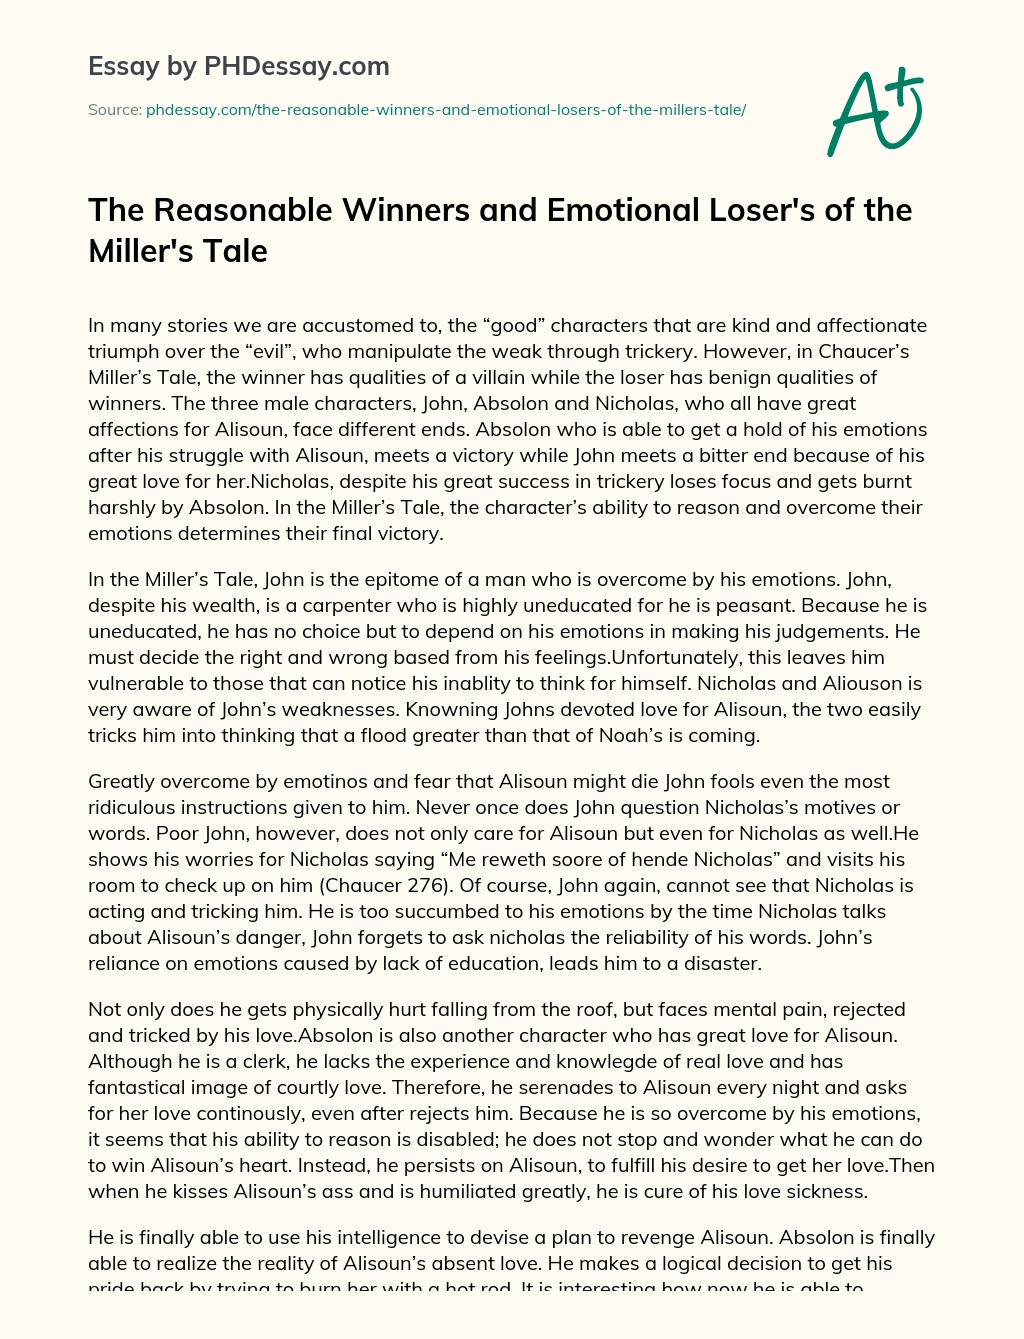 The Reasonable Winners and Emotional Loser’s of the Miller’s Tale essay